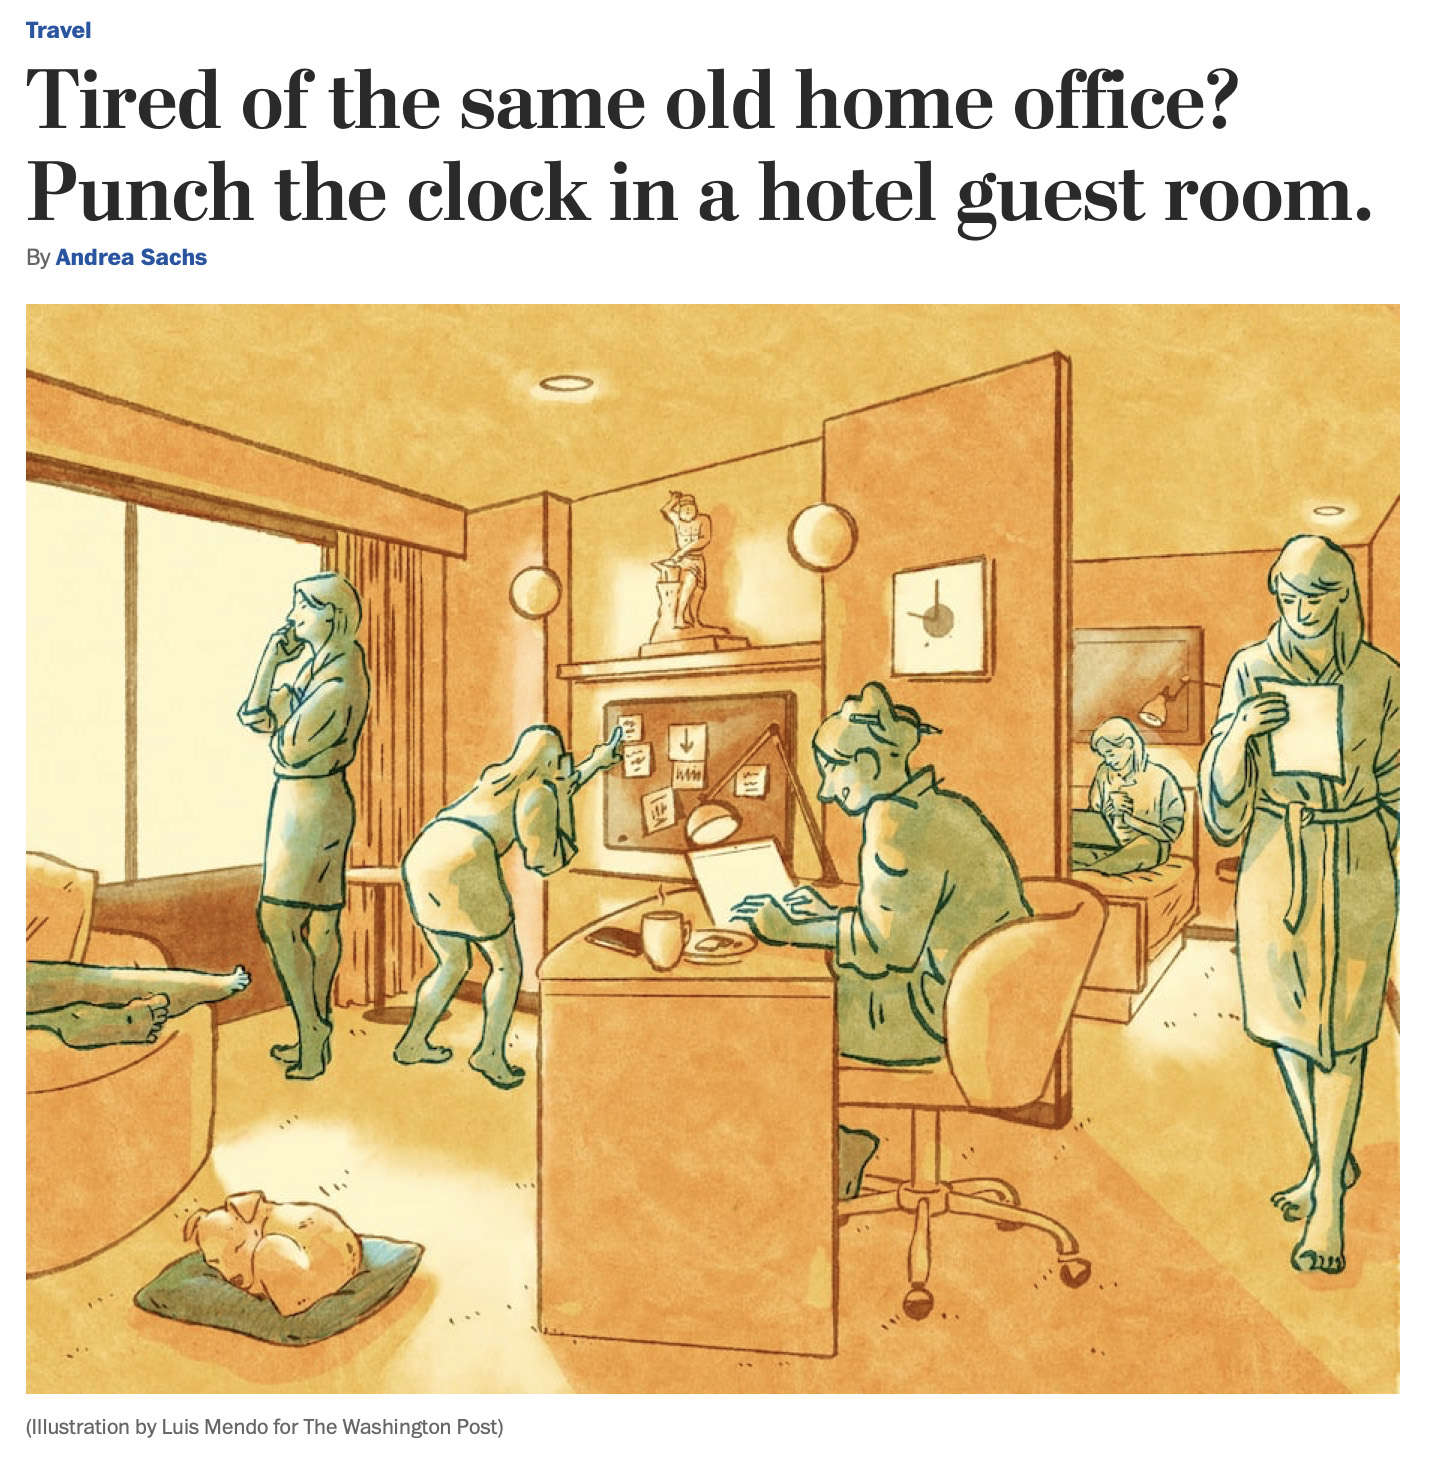 Tired of the same old home office? Punch the clock in a hotel guest room.